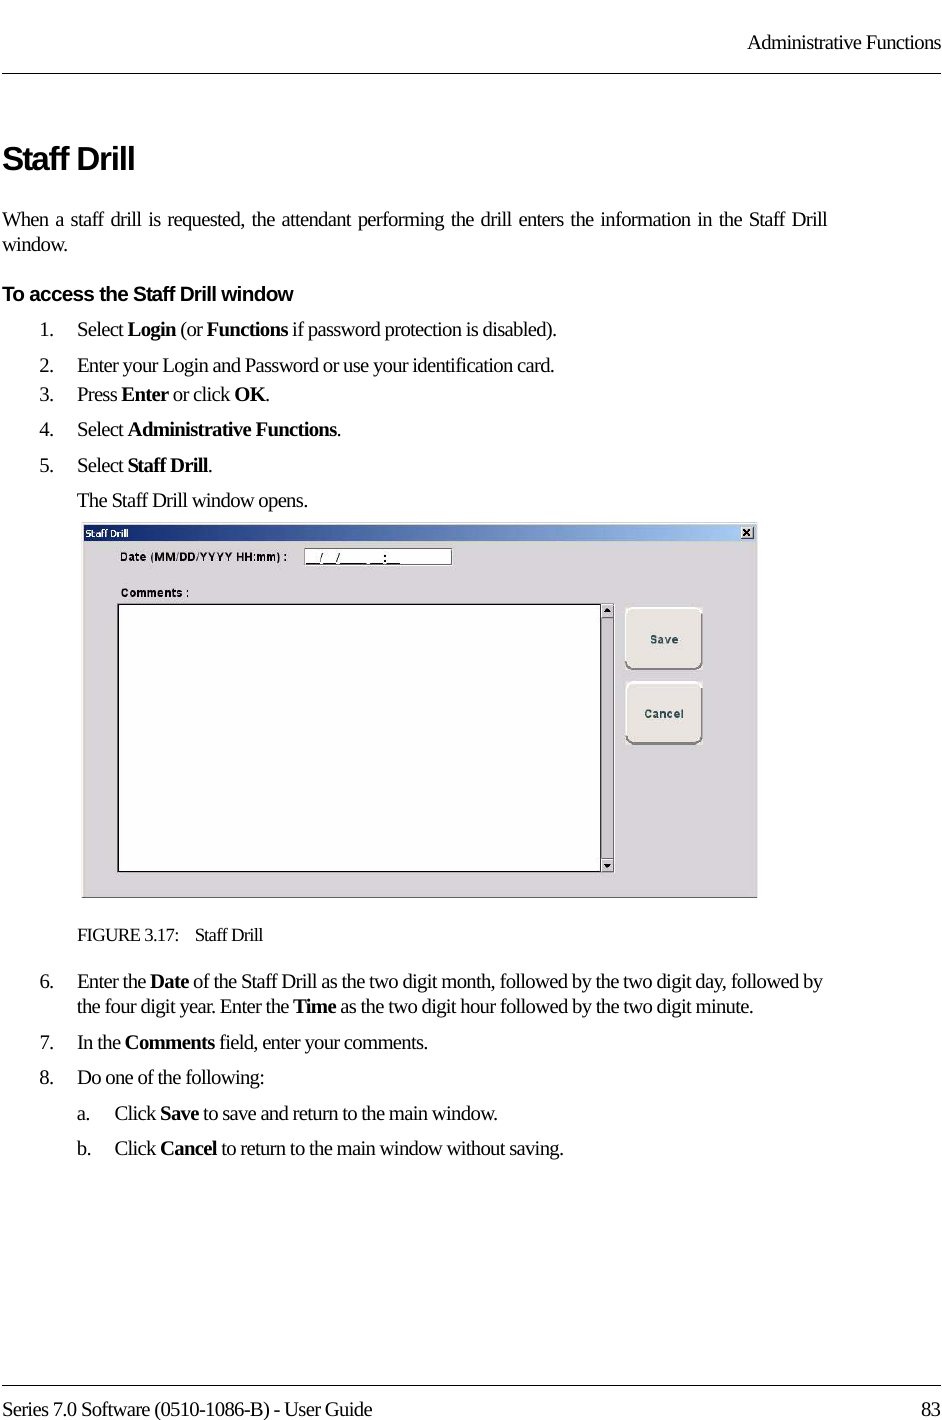 Series 7.0 Software (0510-1086-B) - User Guide  83Administrative FunctionsStaff DrillWhen a staff drill is requested, the attendant performing the drill enters the information in the Staff Drill window.To access the Staff Drill window1.    Select Login (or Functions if password protection is disabled).2.    Enter your Login and Password or use your identification card. 3.    Press Enter or click OK.4.    Select Administrative Functions.5.    Select Staff Drill.The Staff Drill window opens.FIGURE 3.17:    Staff Drill6.    Enter the Date of the Staff Drill as the two digit month, followed by the two digit day, followed by the four digit year. Enter the Time as the two digit hour followed by the two digit minute.7.    In the Comments field, enter your comments.8.    Do one of the following:a.    Click Save to save and return to the main window. b.    Click Cancel to return to the main window without saving.